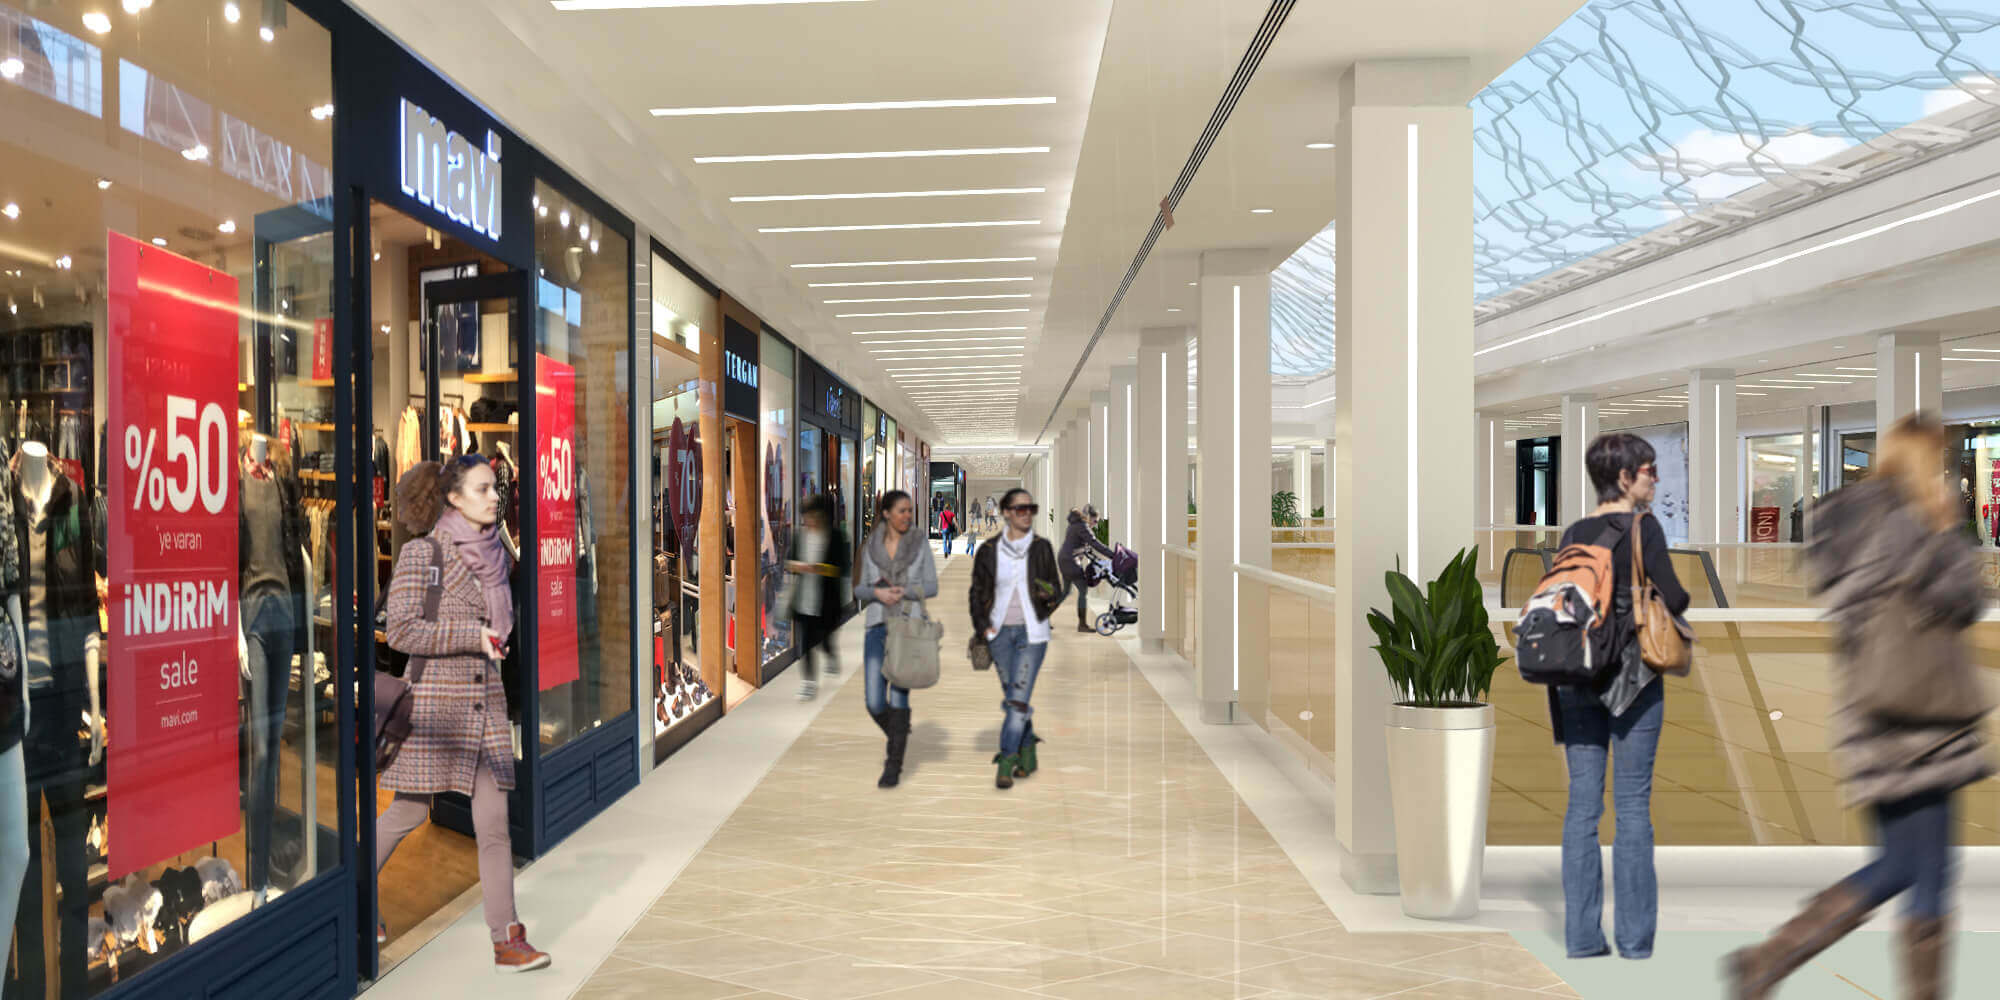 Icerenkoy shopping mall Istanbul interior design of existing mall